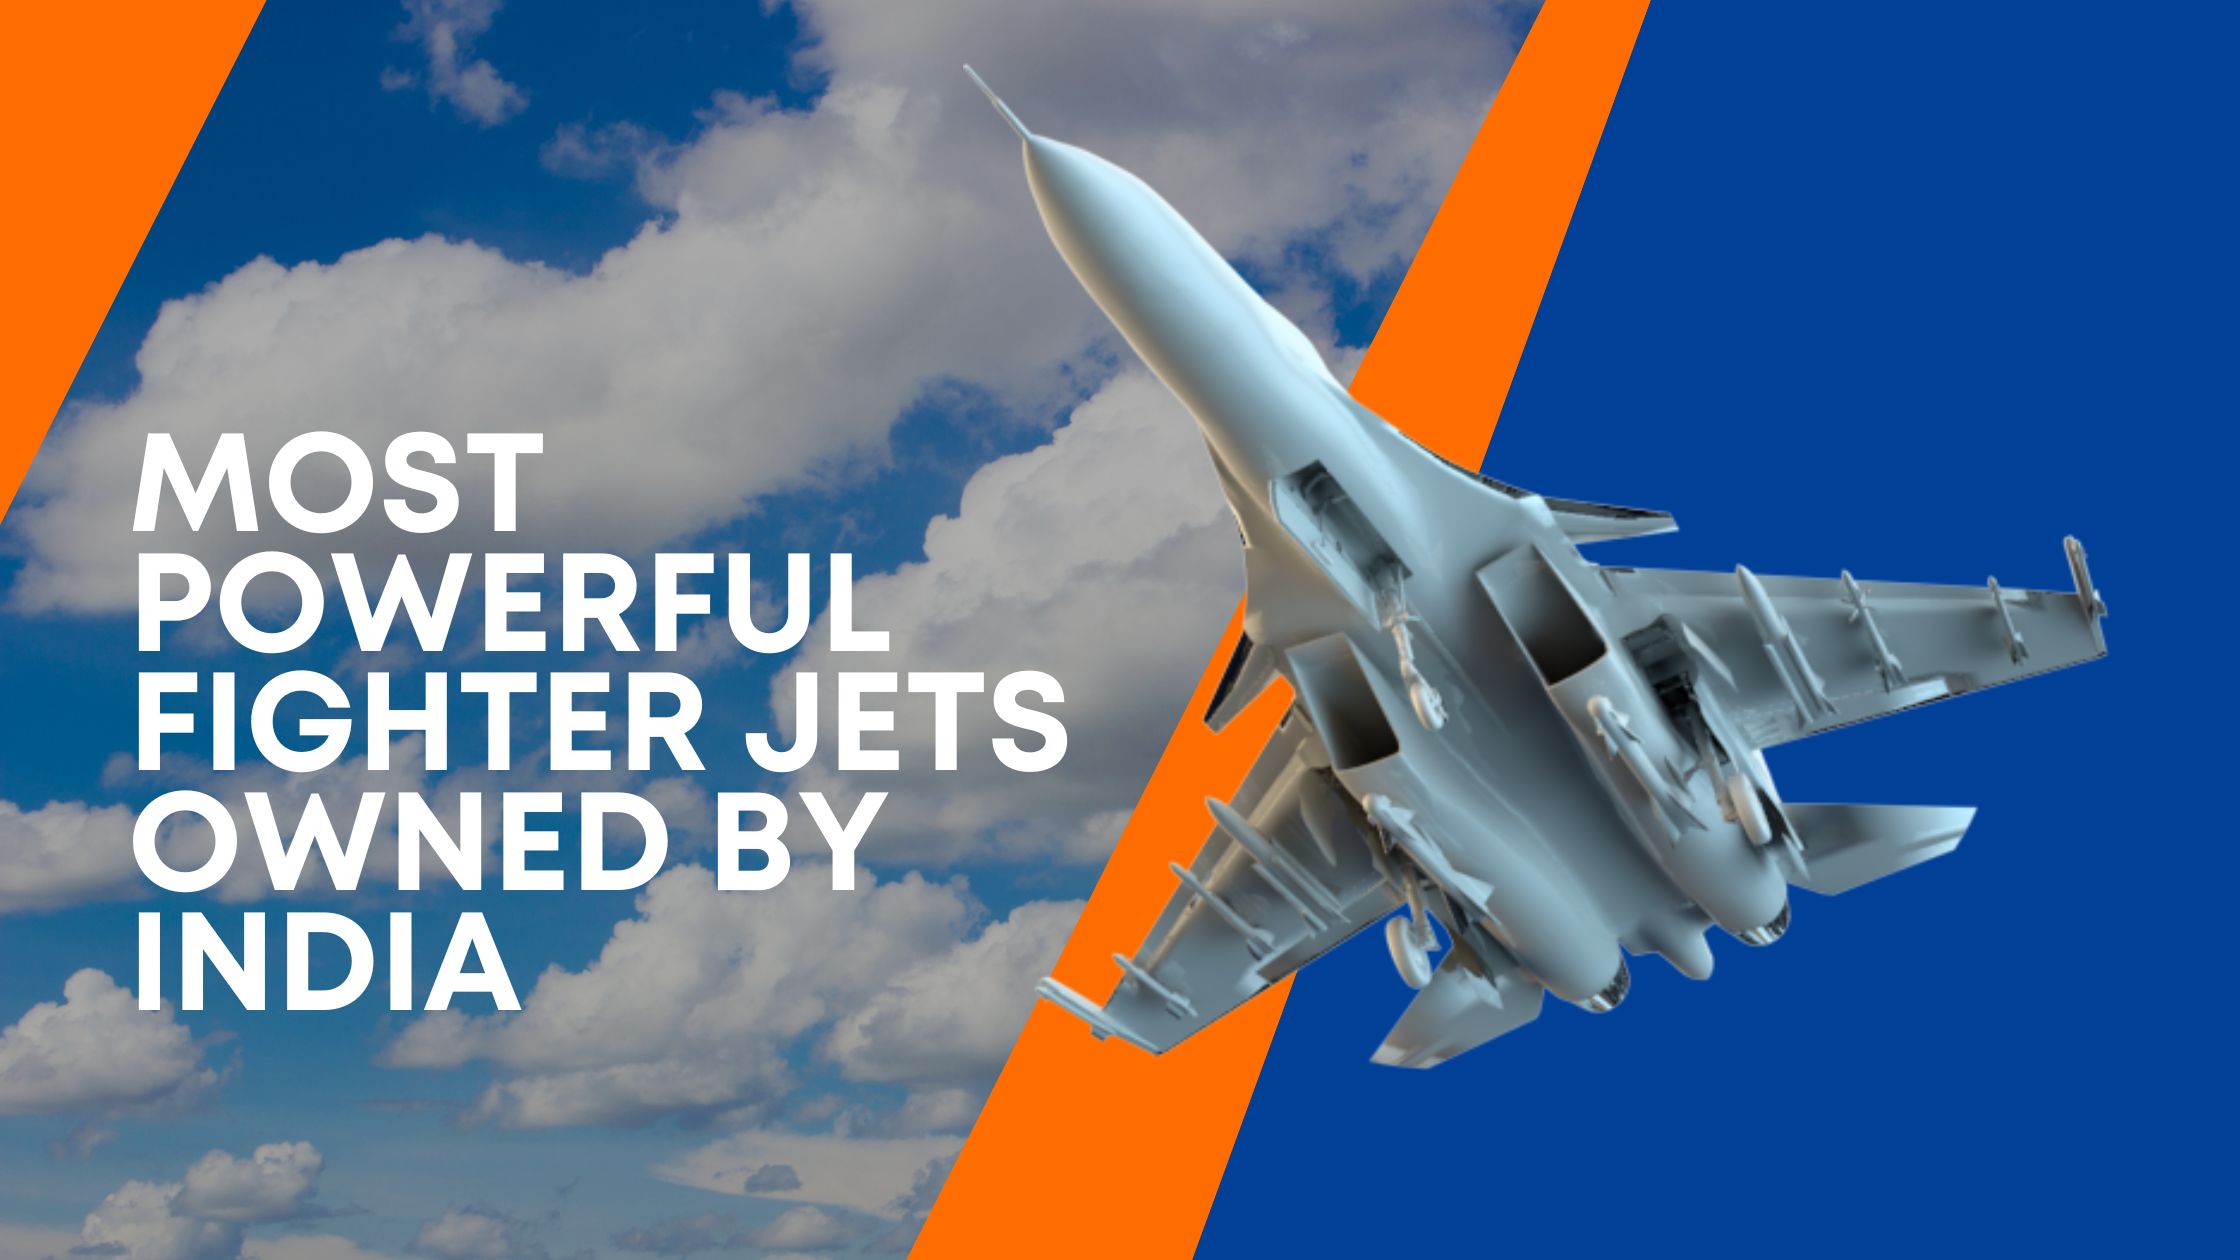 Most powerful Fighter Jets owned by India